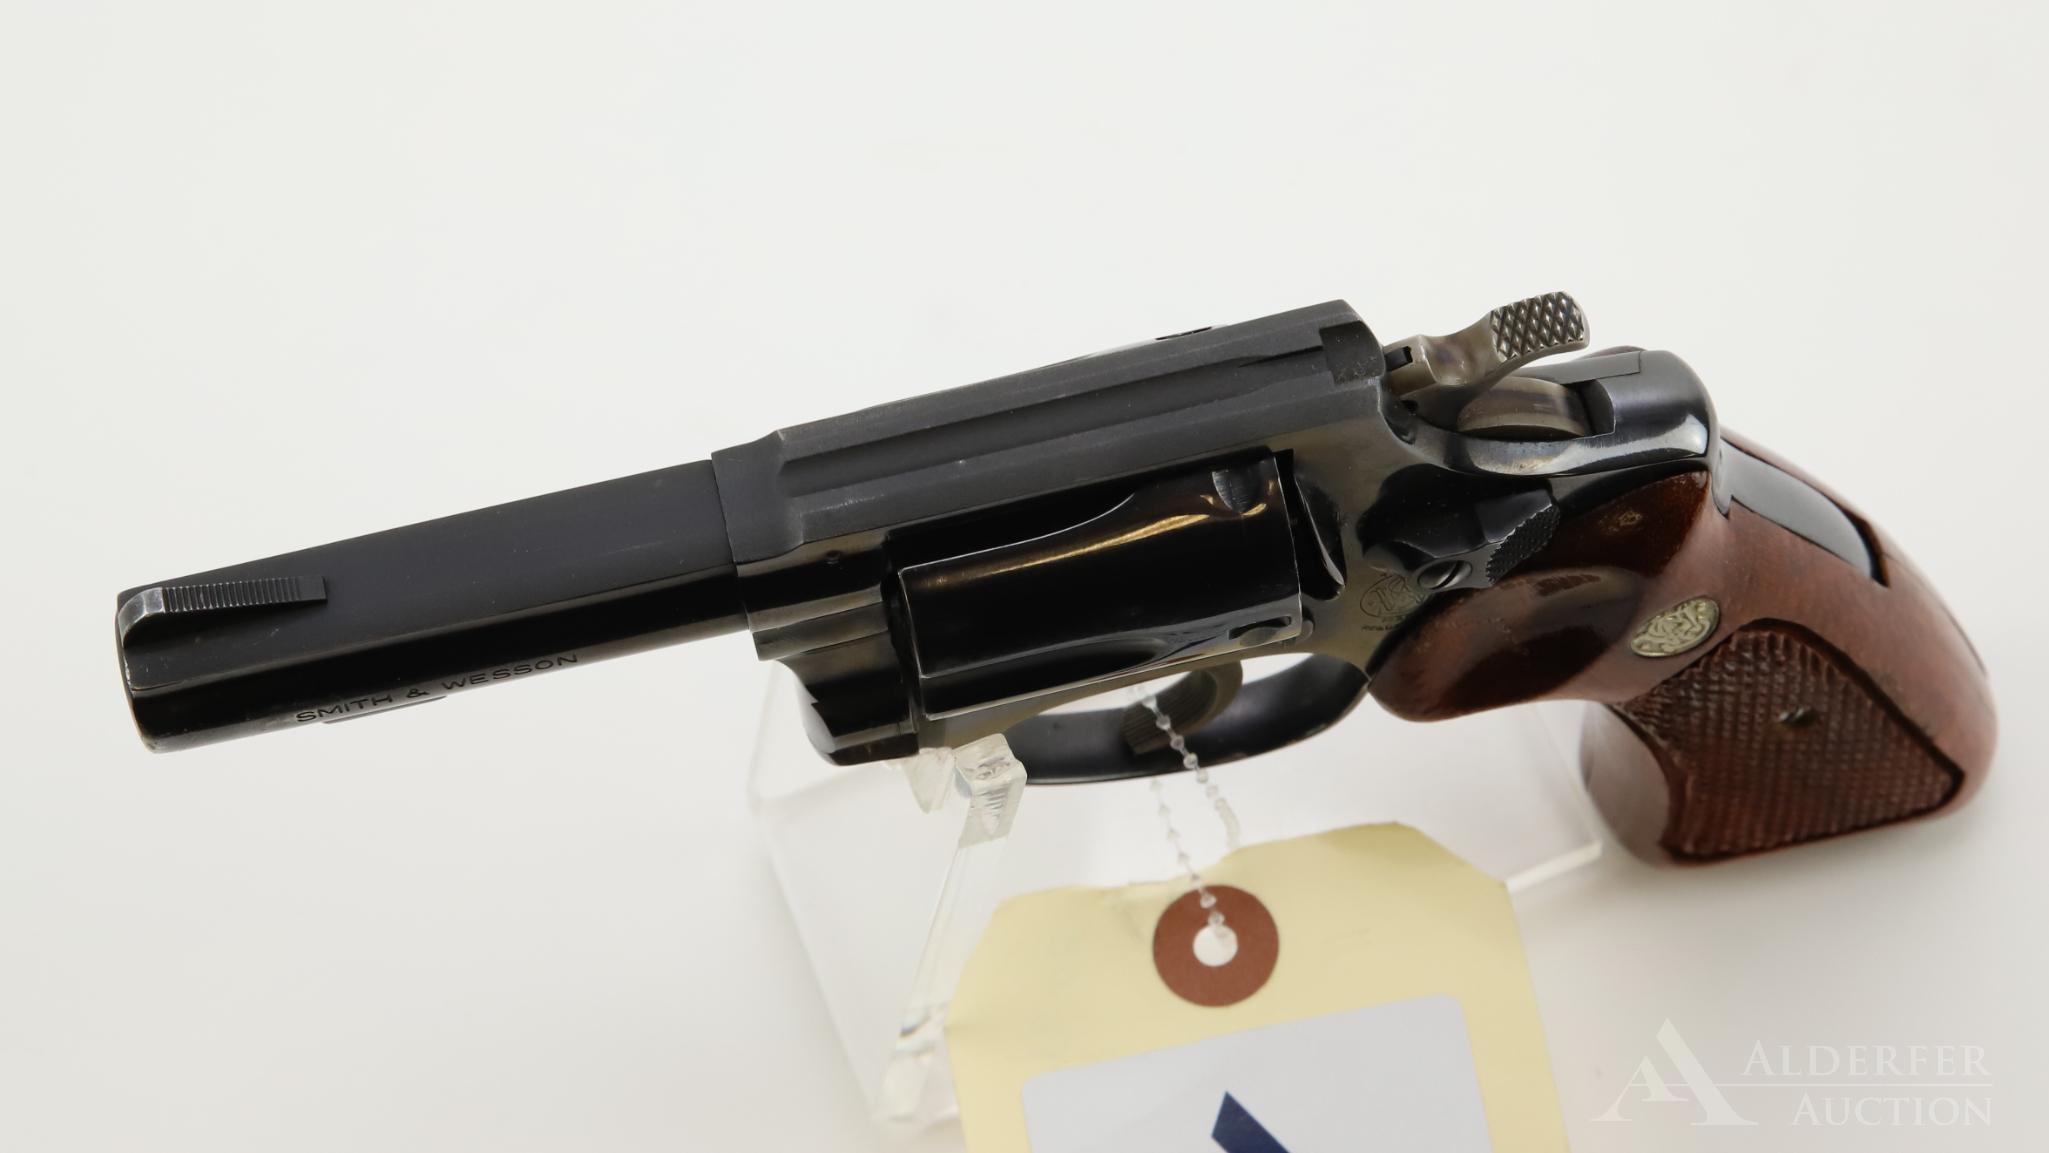 Smith & Wesson 36-1 double action revolver.